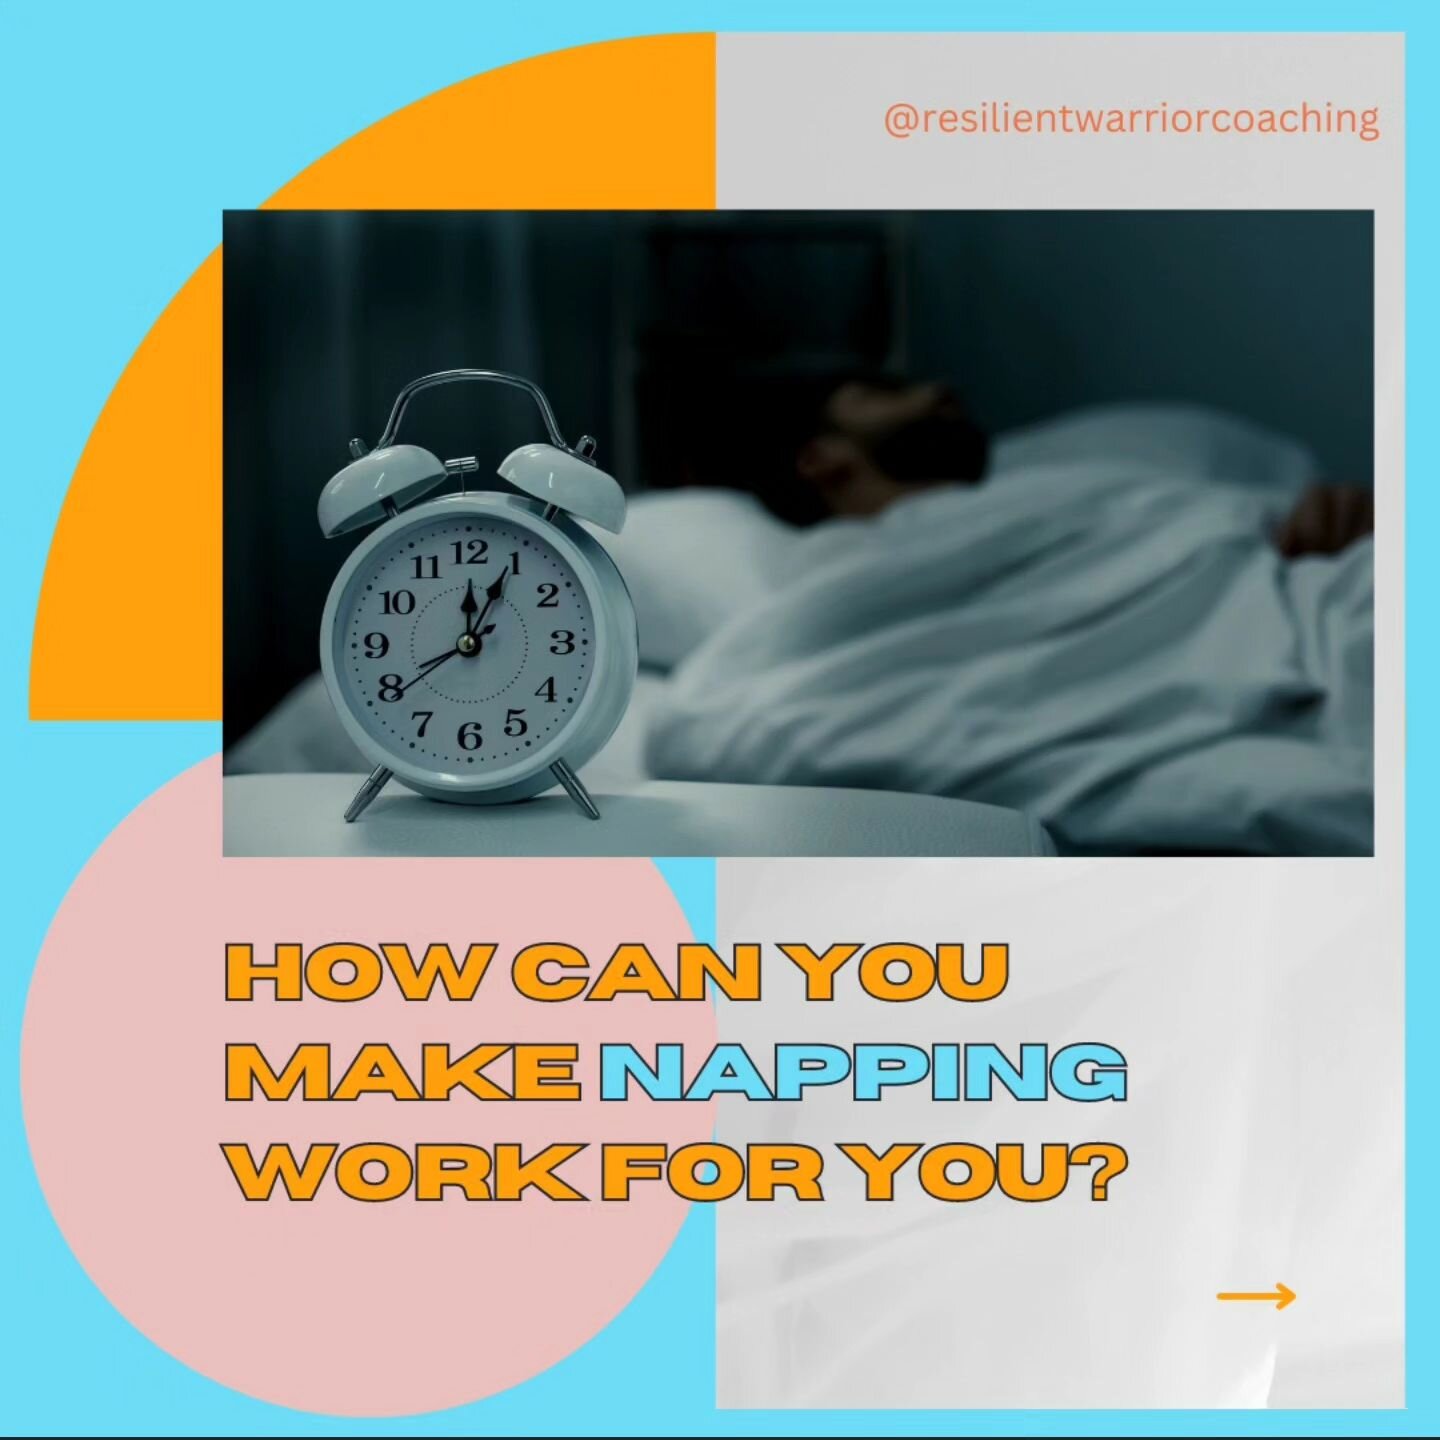 Sure, napping is often something we want to avoid because it messes up our sleep cycle....But that's an ideal.
⁣
The truth with chronic pain is that sometimes you really need naps to help regain energy or keep from bottoming out. Or because you just 